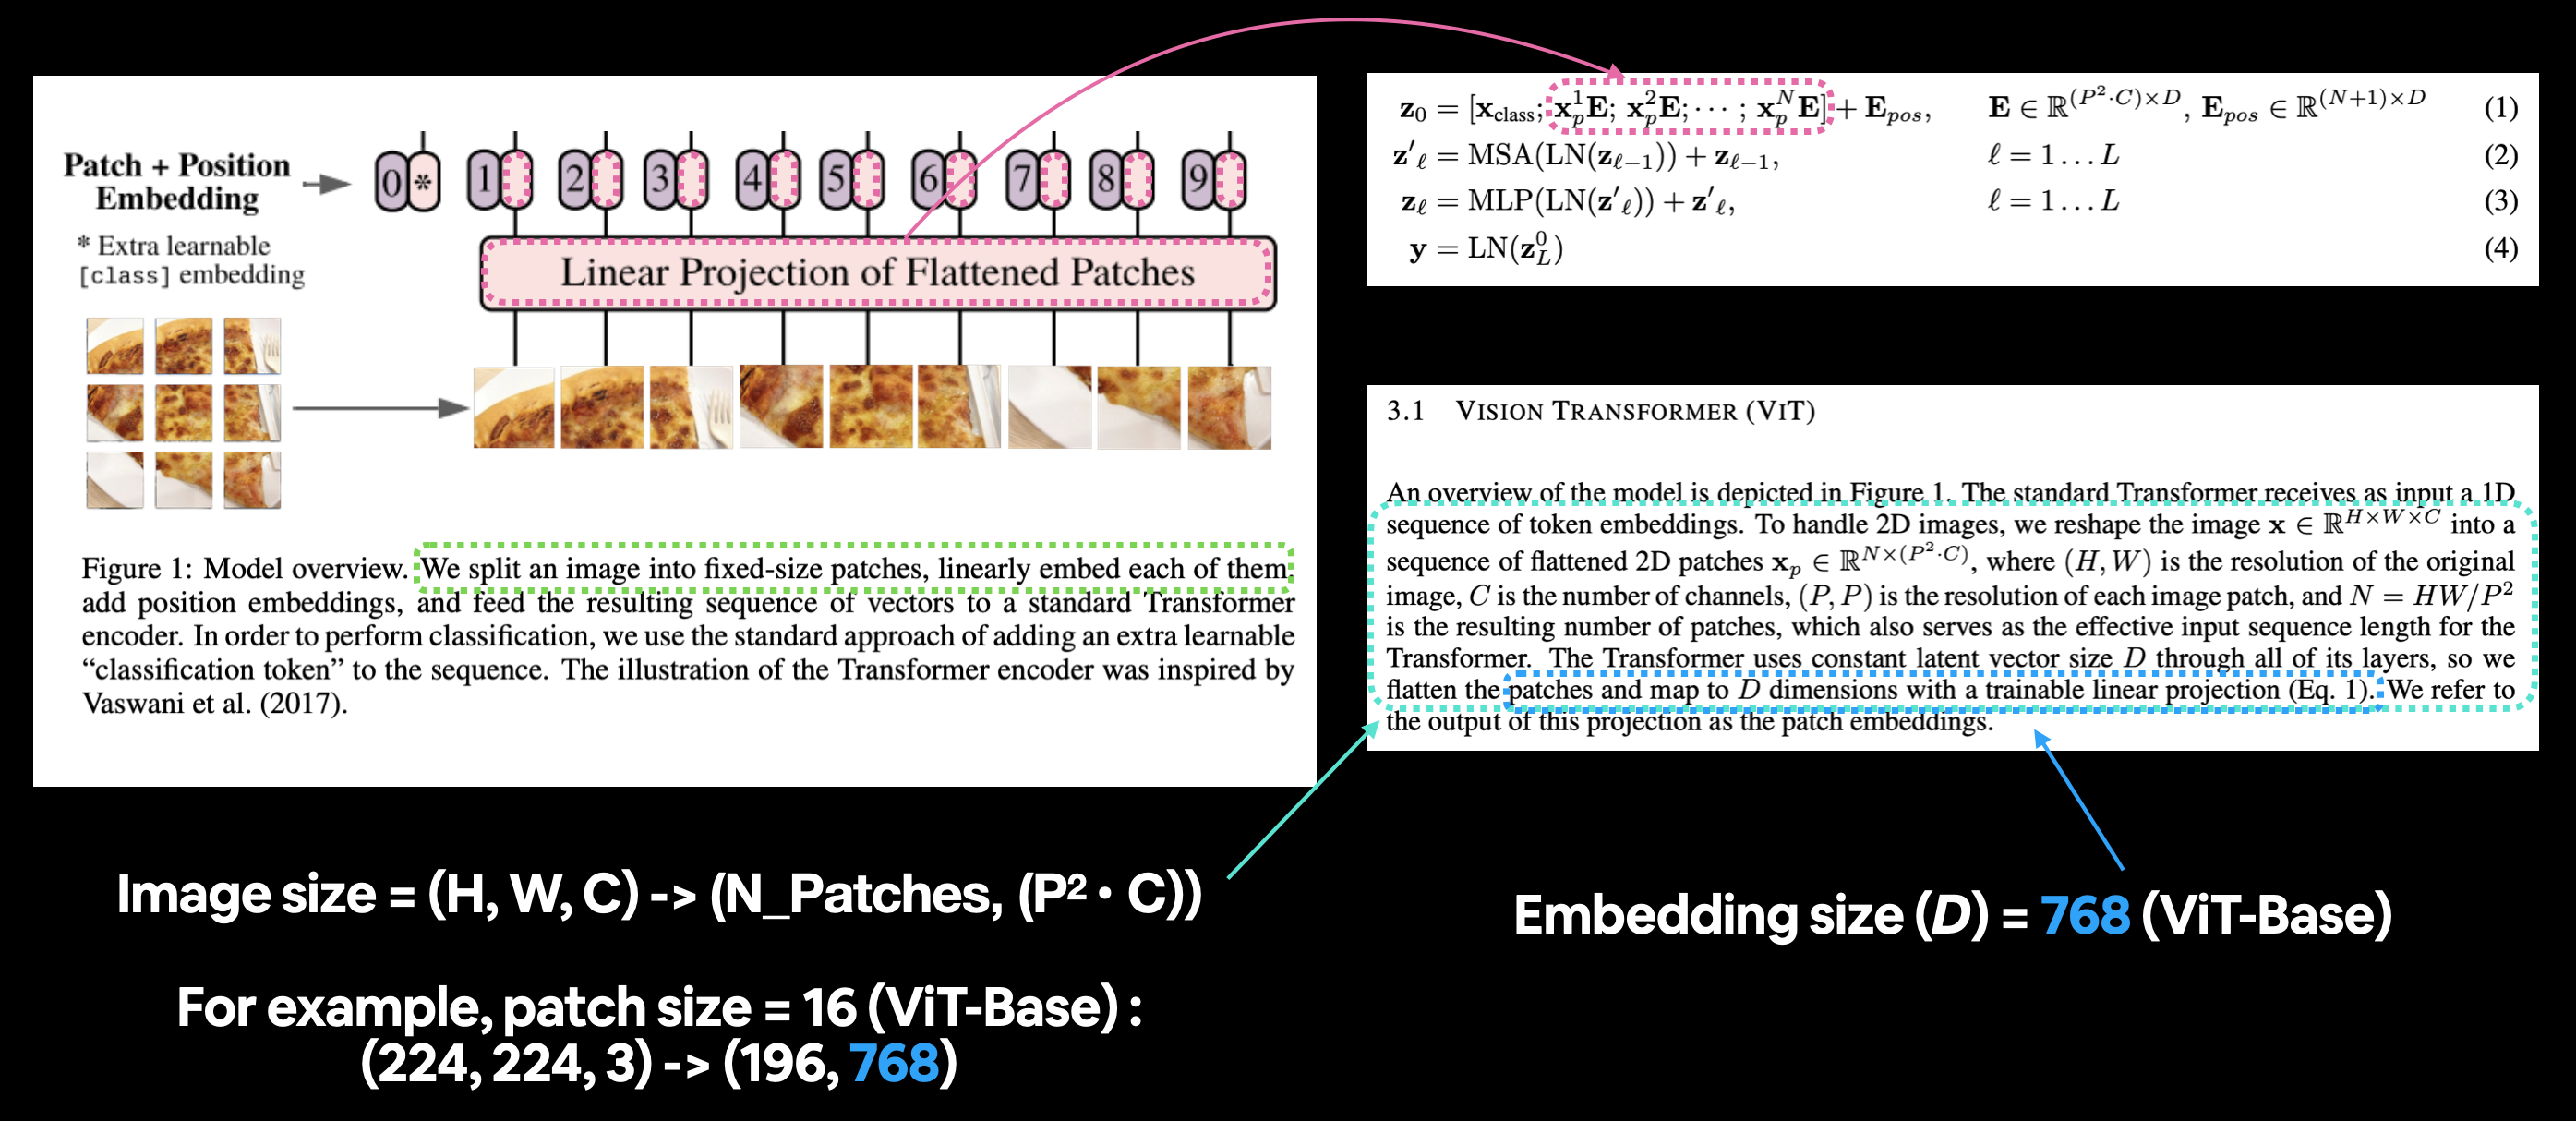 mapping the vit architecture diagram positional and patch embeddings portion to the relative mathematical equation describing what's going on